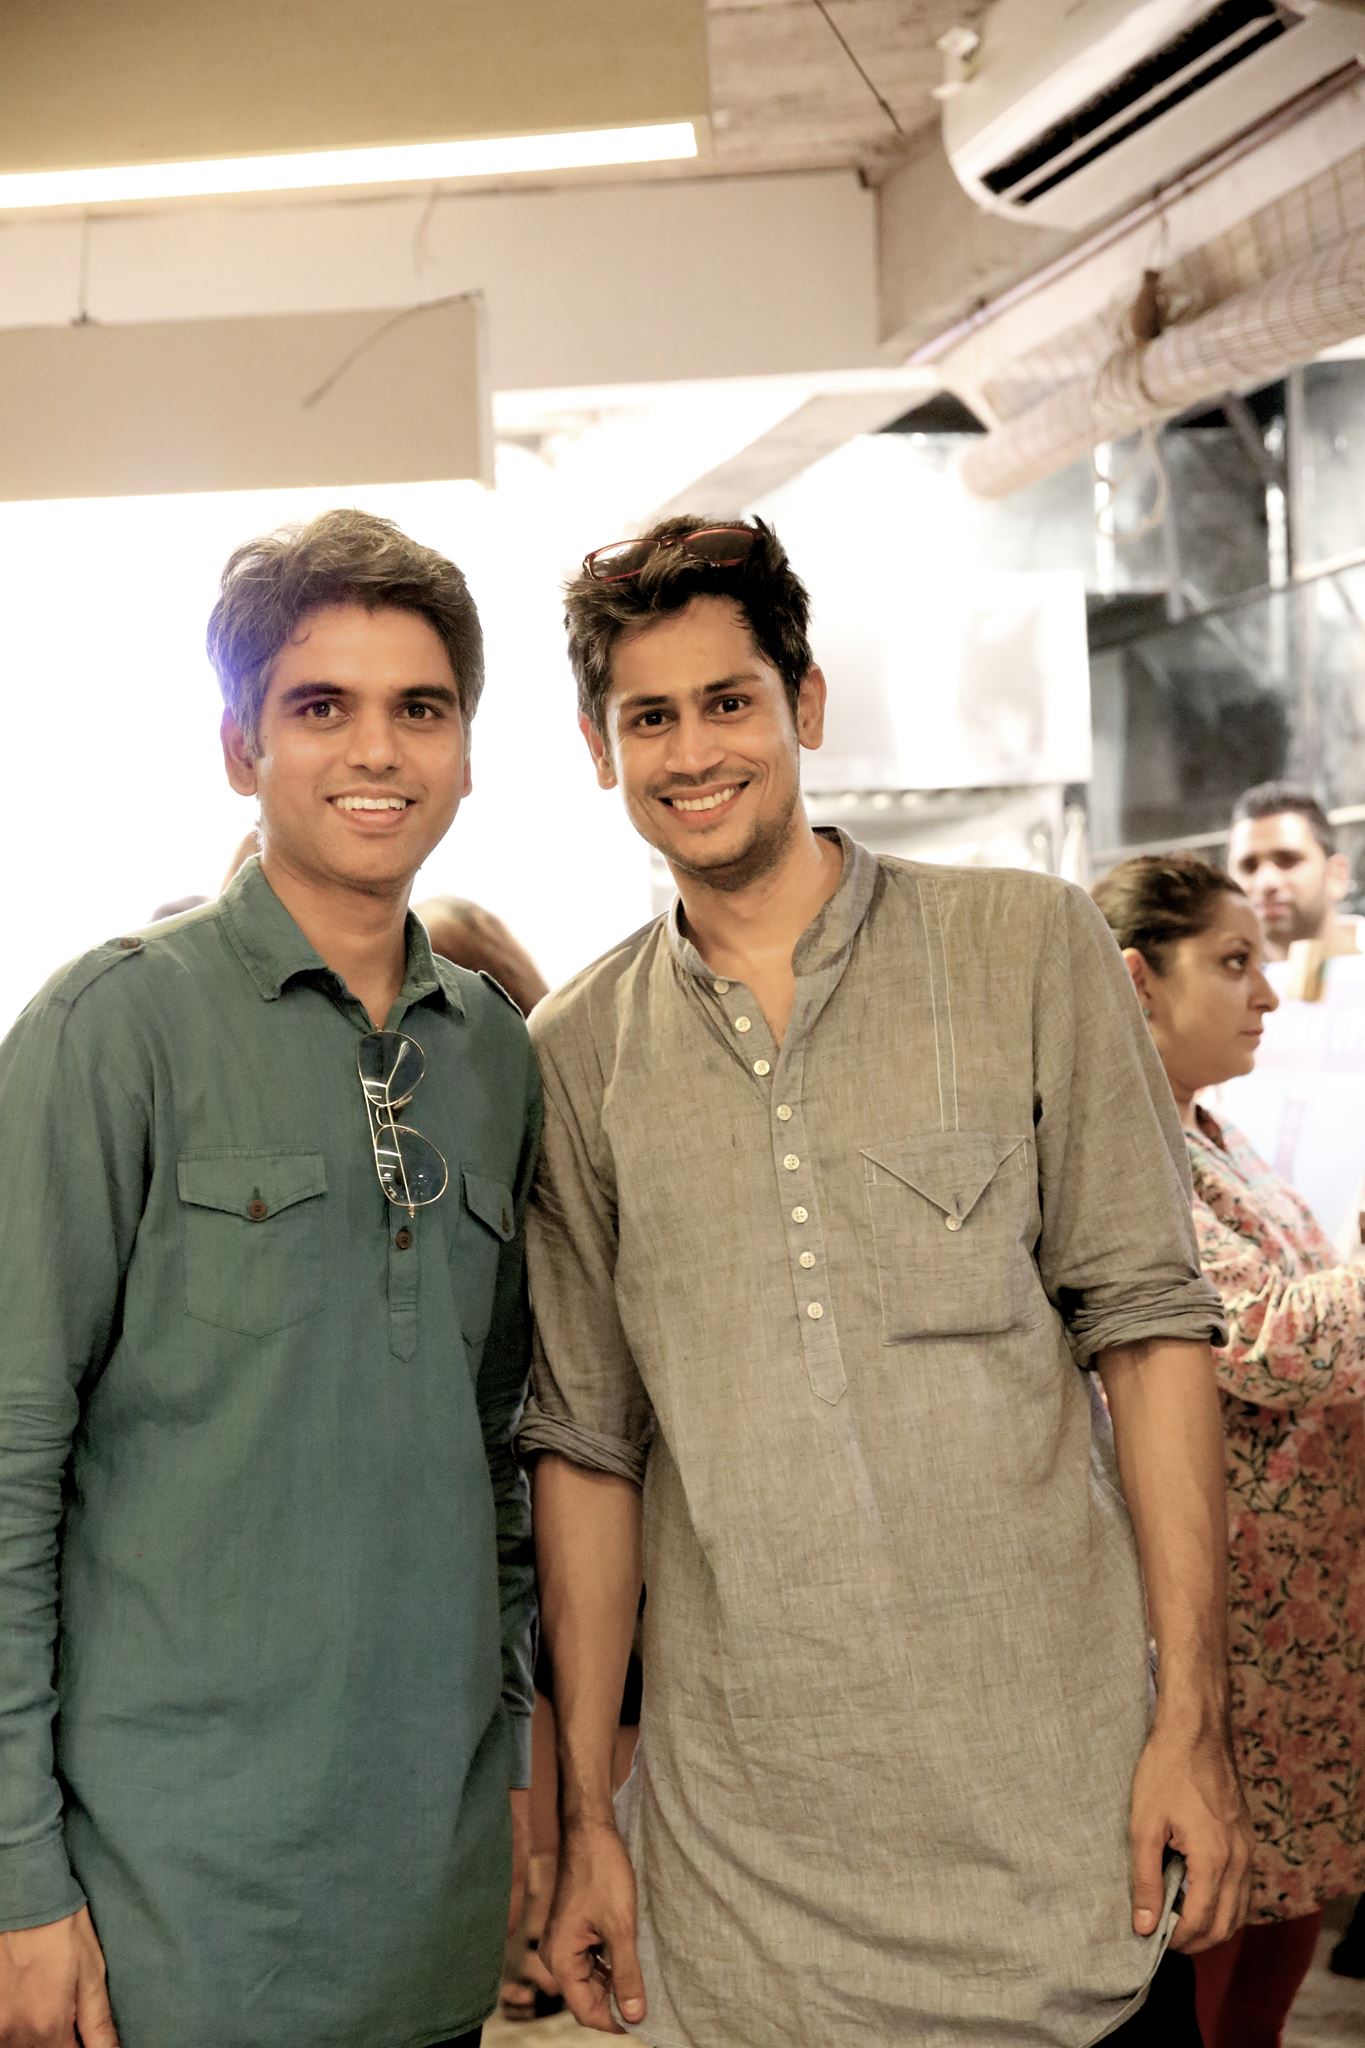 mohit-and-nitin-co-founders-of-greenr-cafe